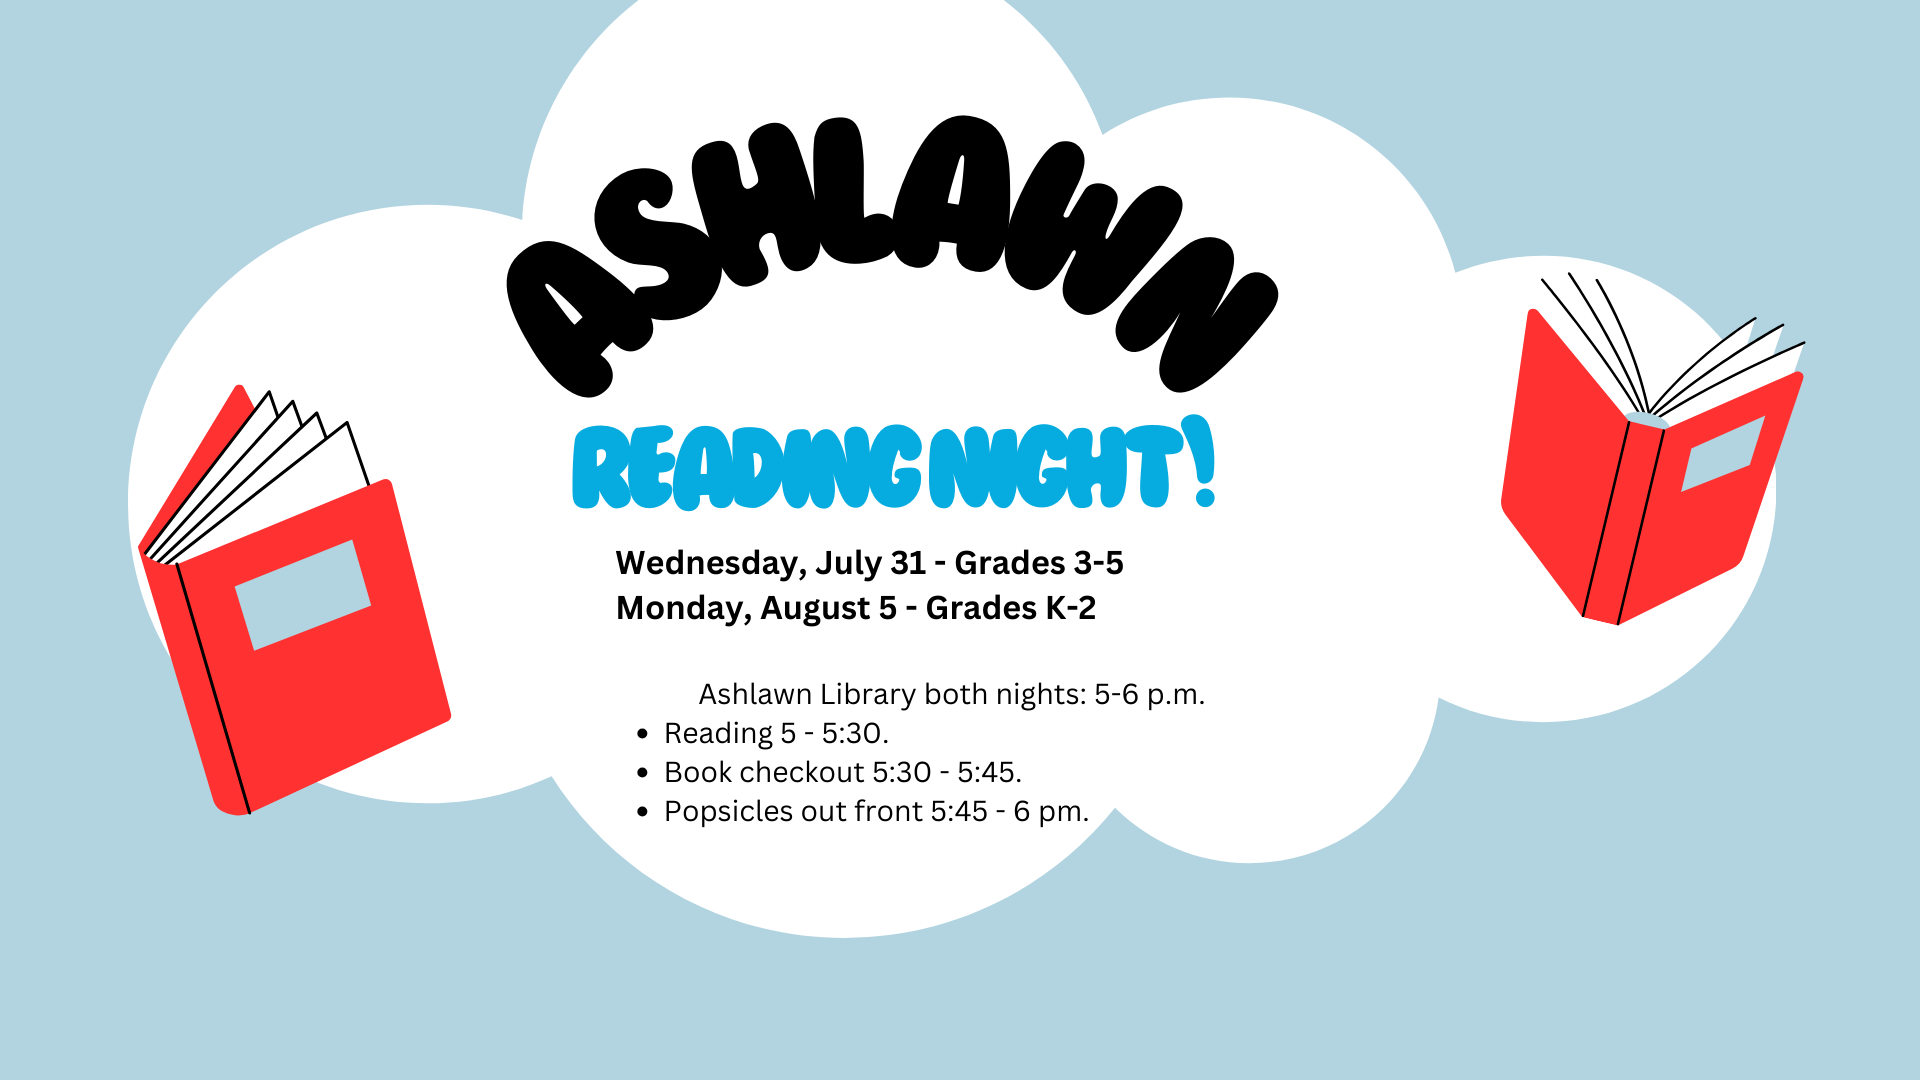 Wednesday, July 31 - Grades 3-5 Monday, August 5 - Grades K-2 Ashlawn library both nights: 5-6 p.m. Reading 5 - 5:30. Book checkout 5:30 - 5:45. Popsicles out front 5:45 - 6 pm.